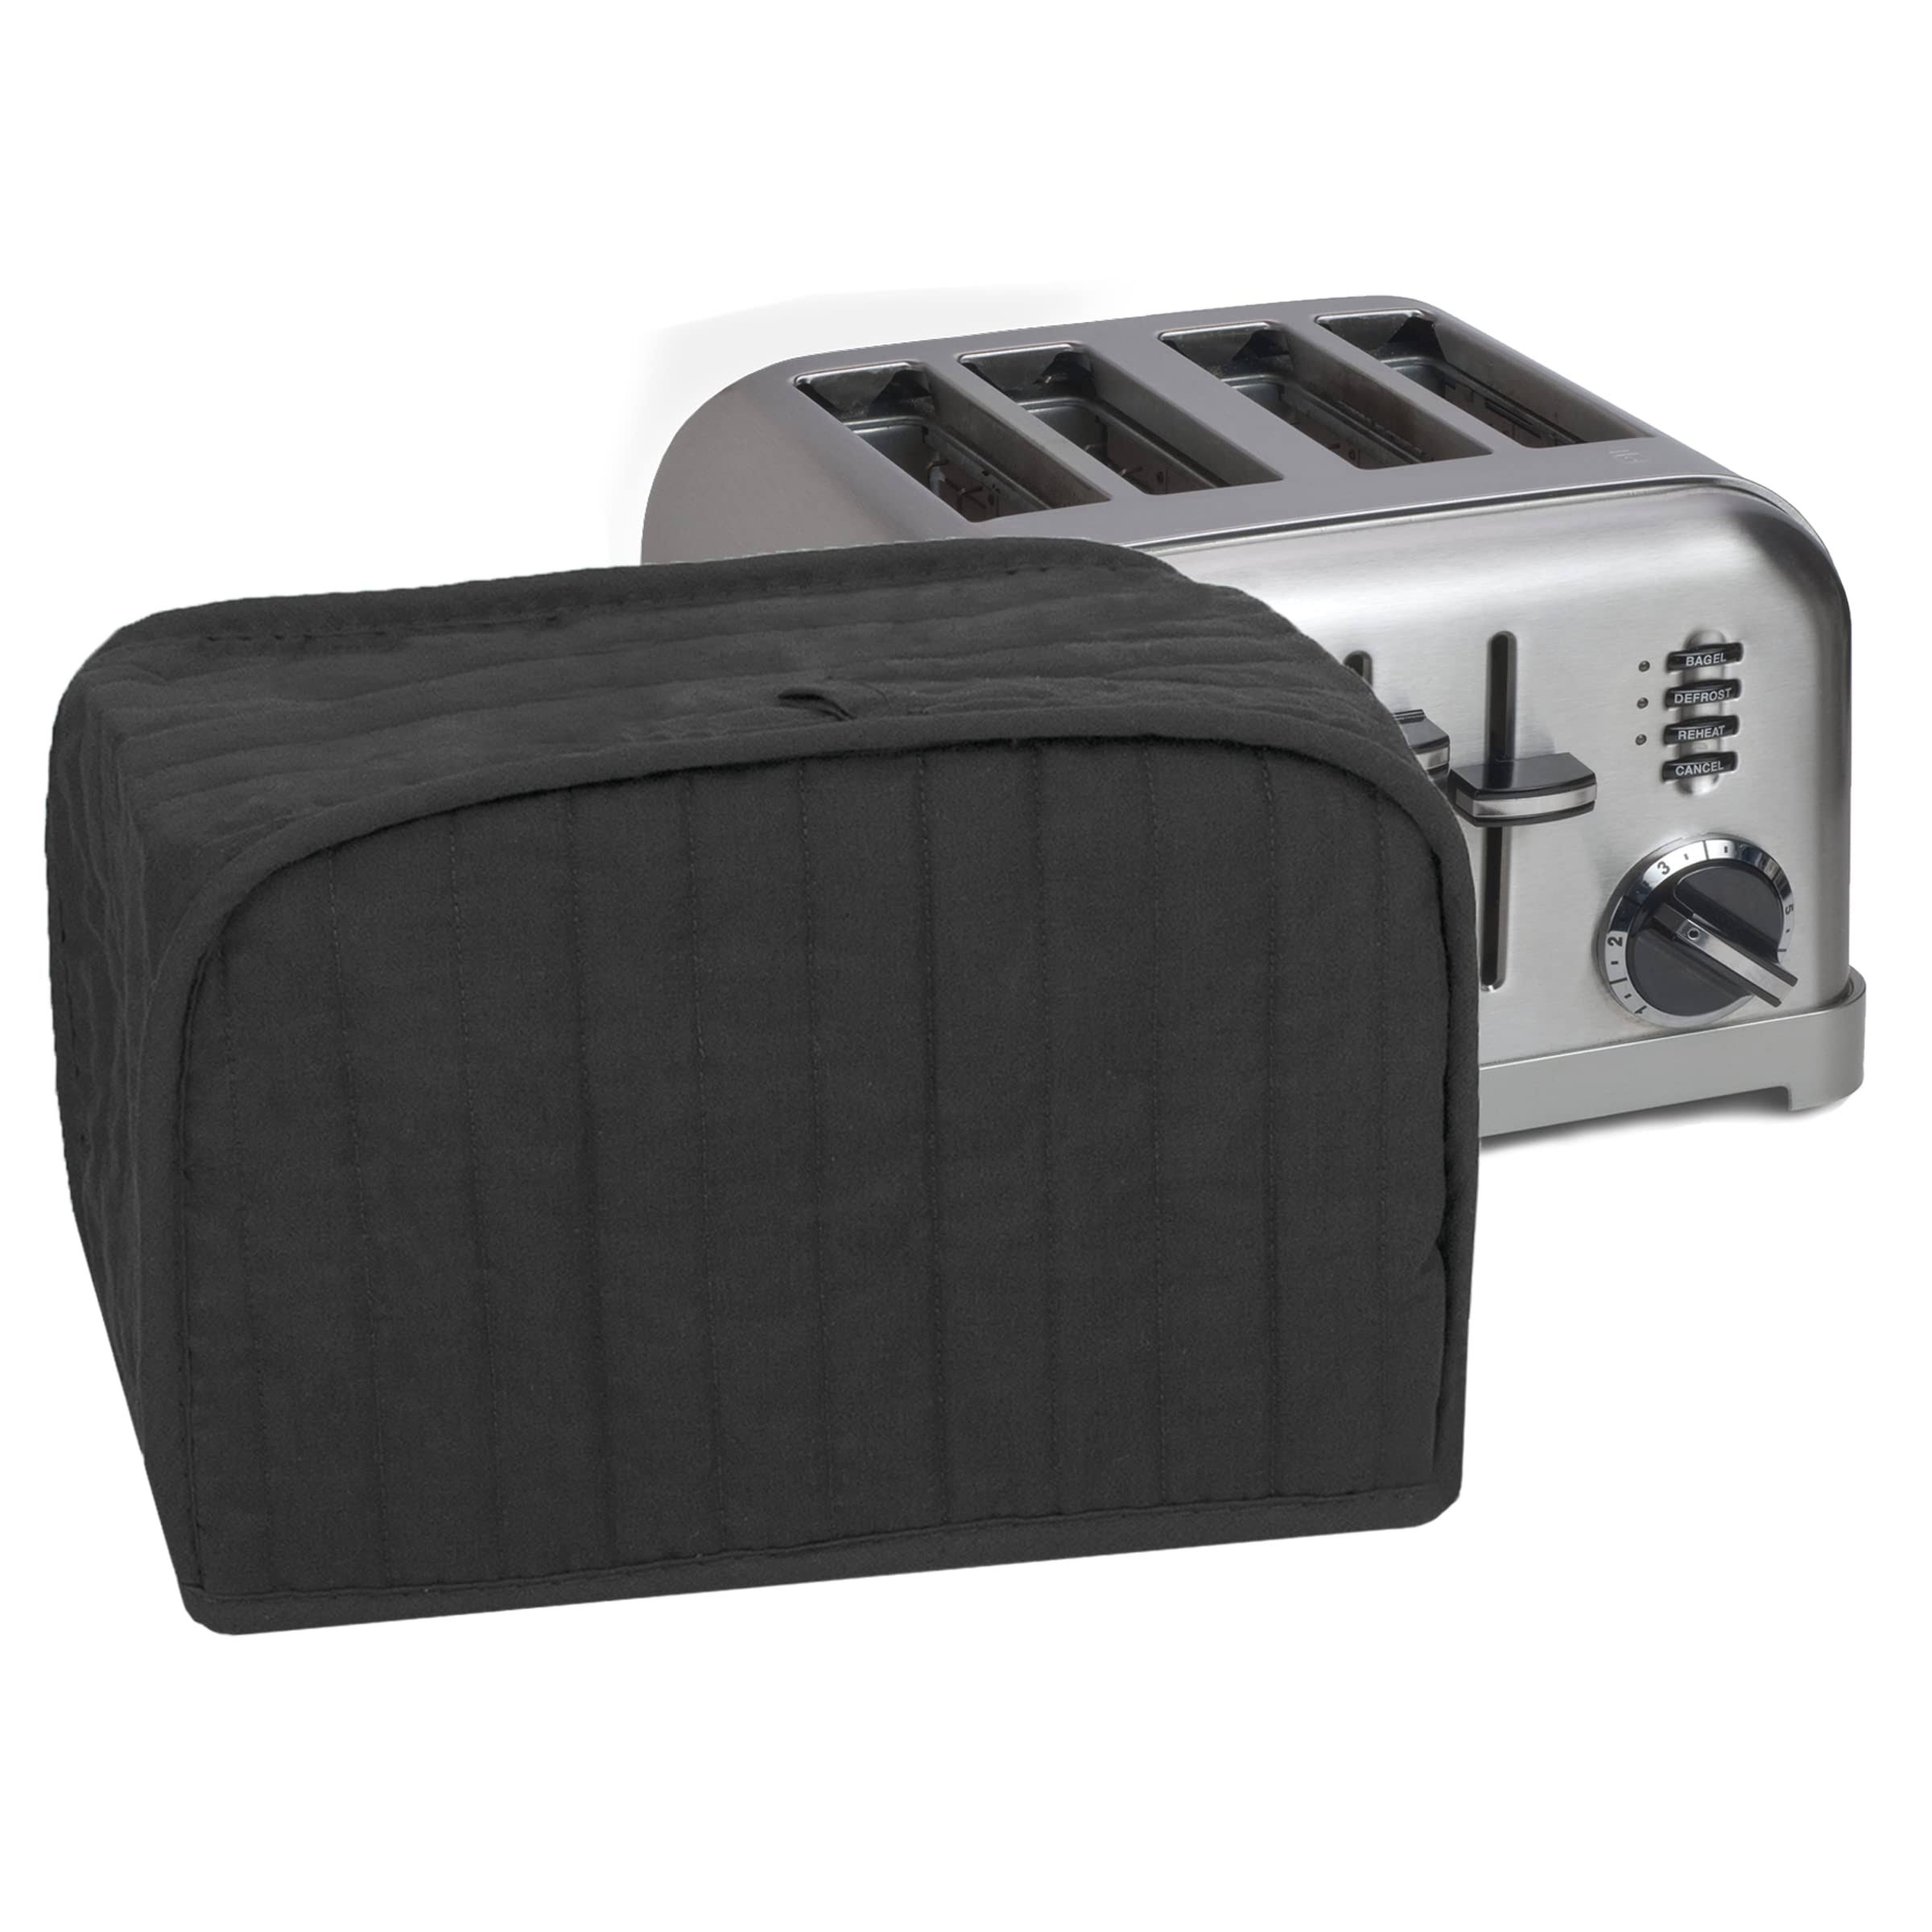 Ritz Quilted Four Slice Toaster Appliance Cover, Black